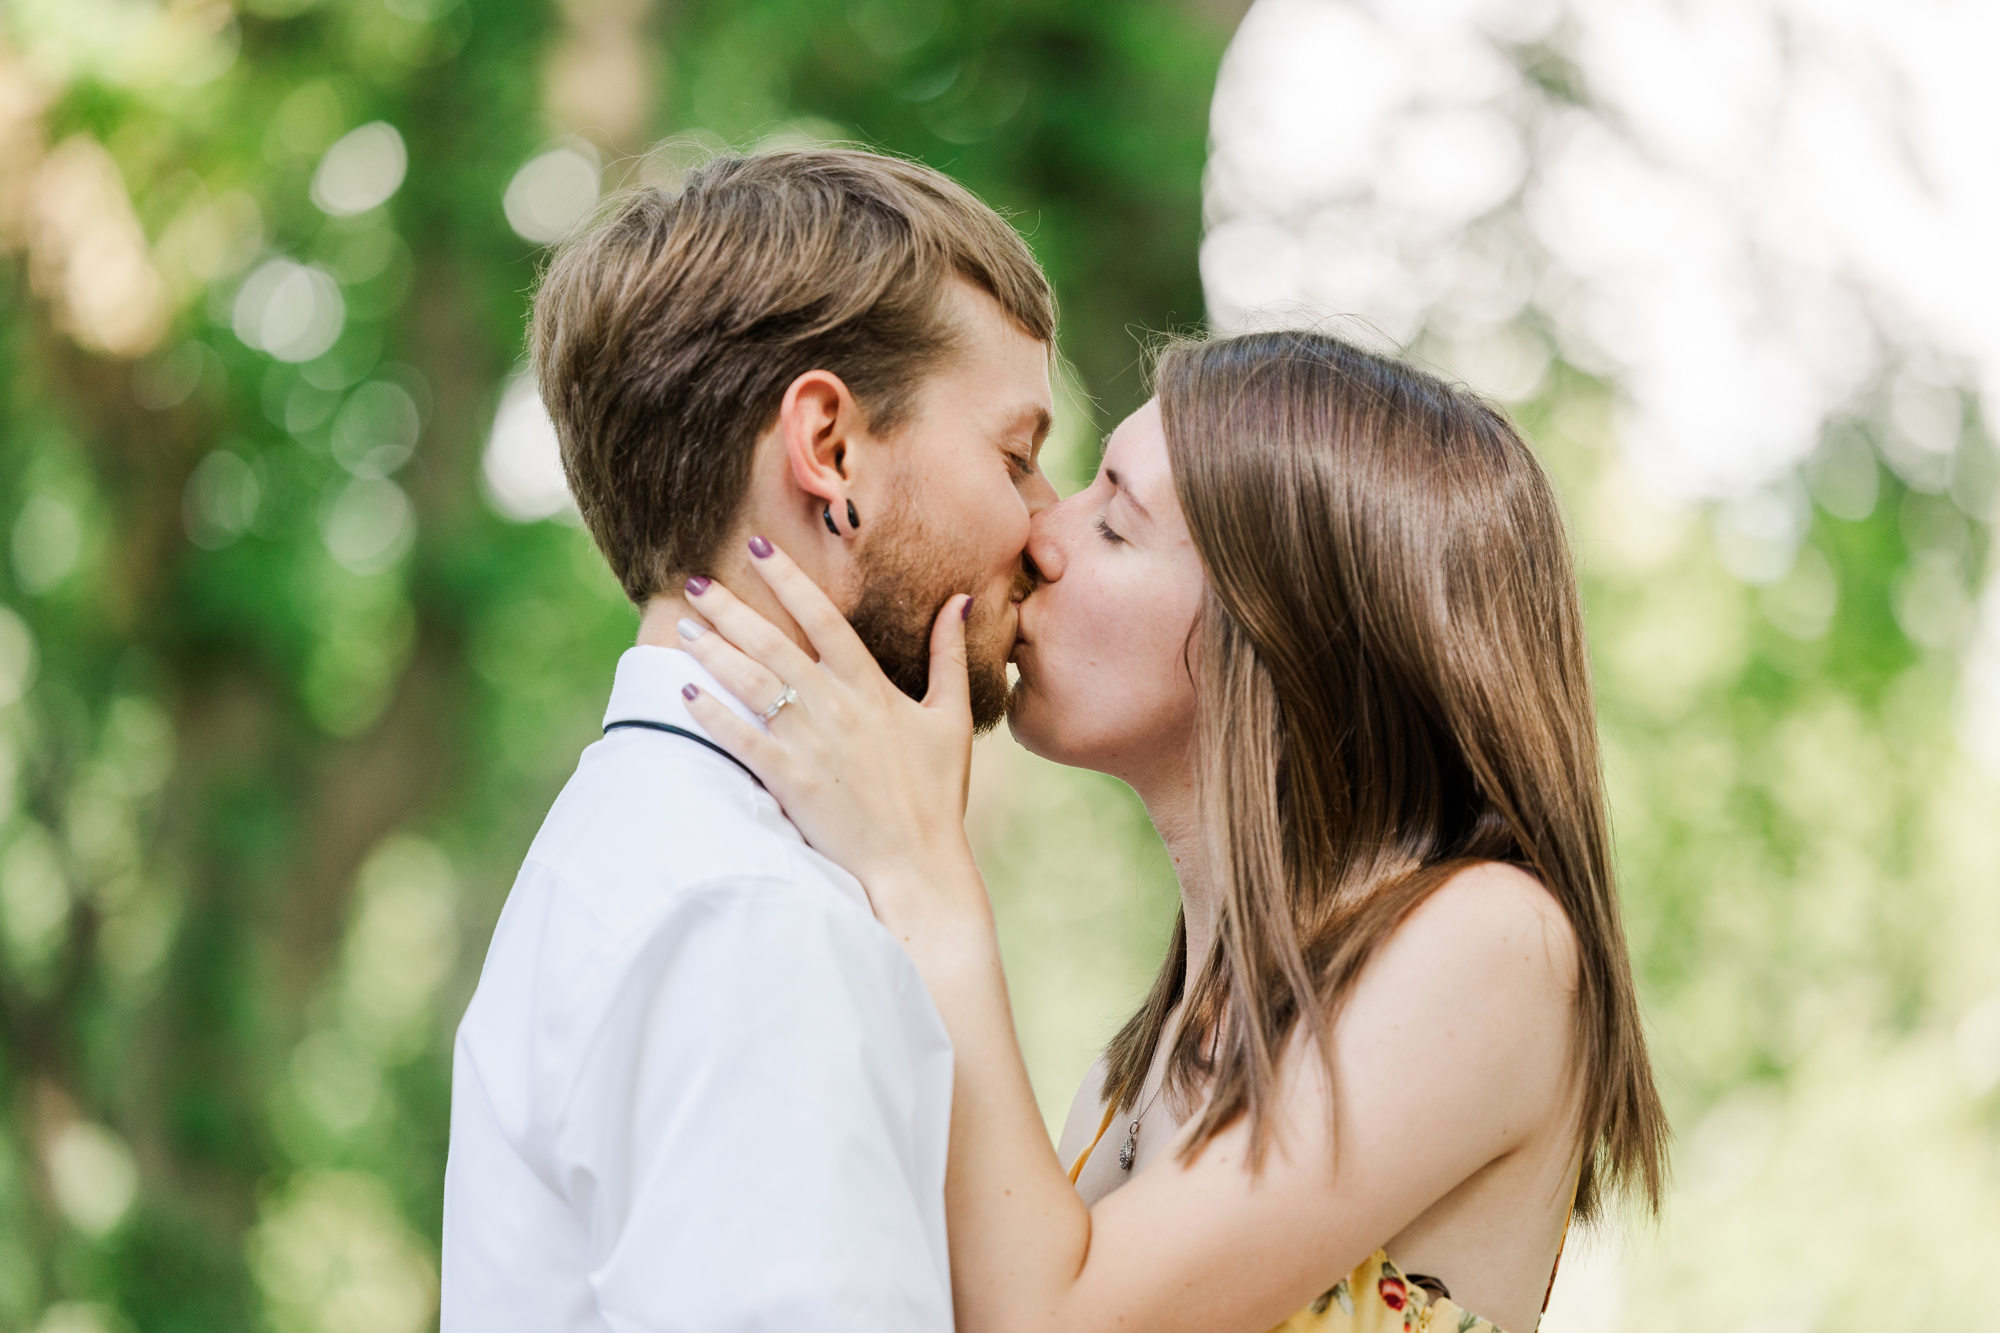 Flawless Central Park Elopement in the Summertime